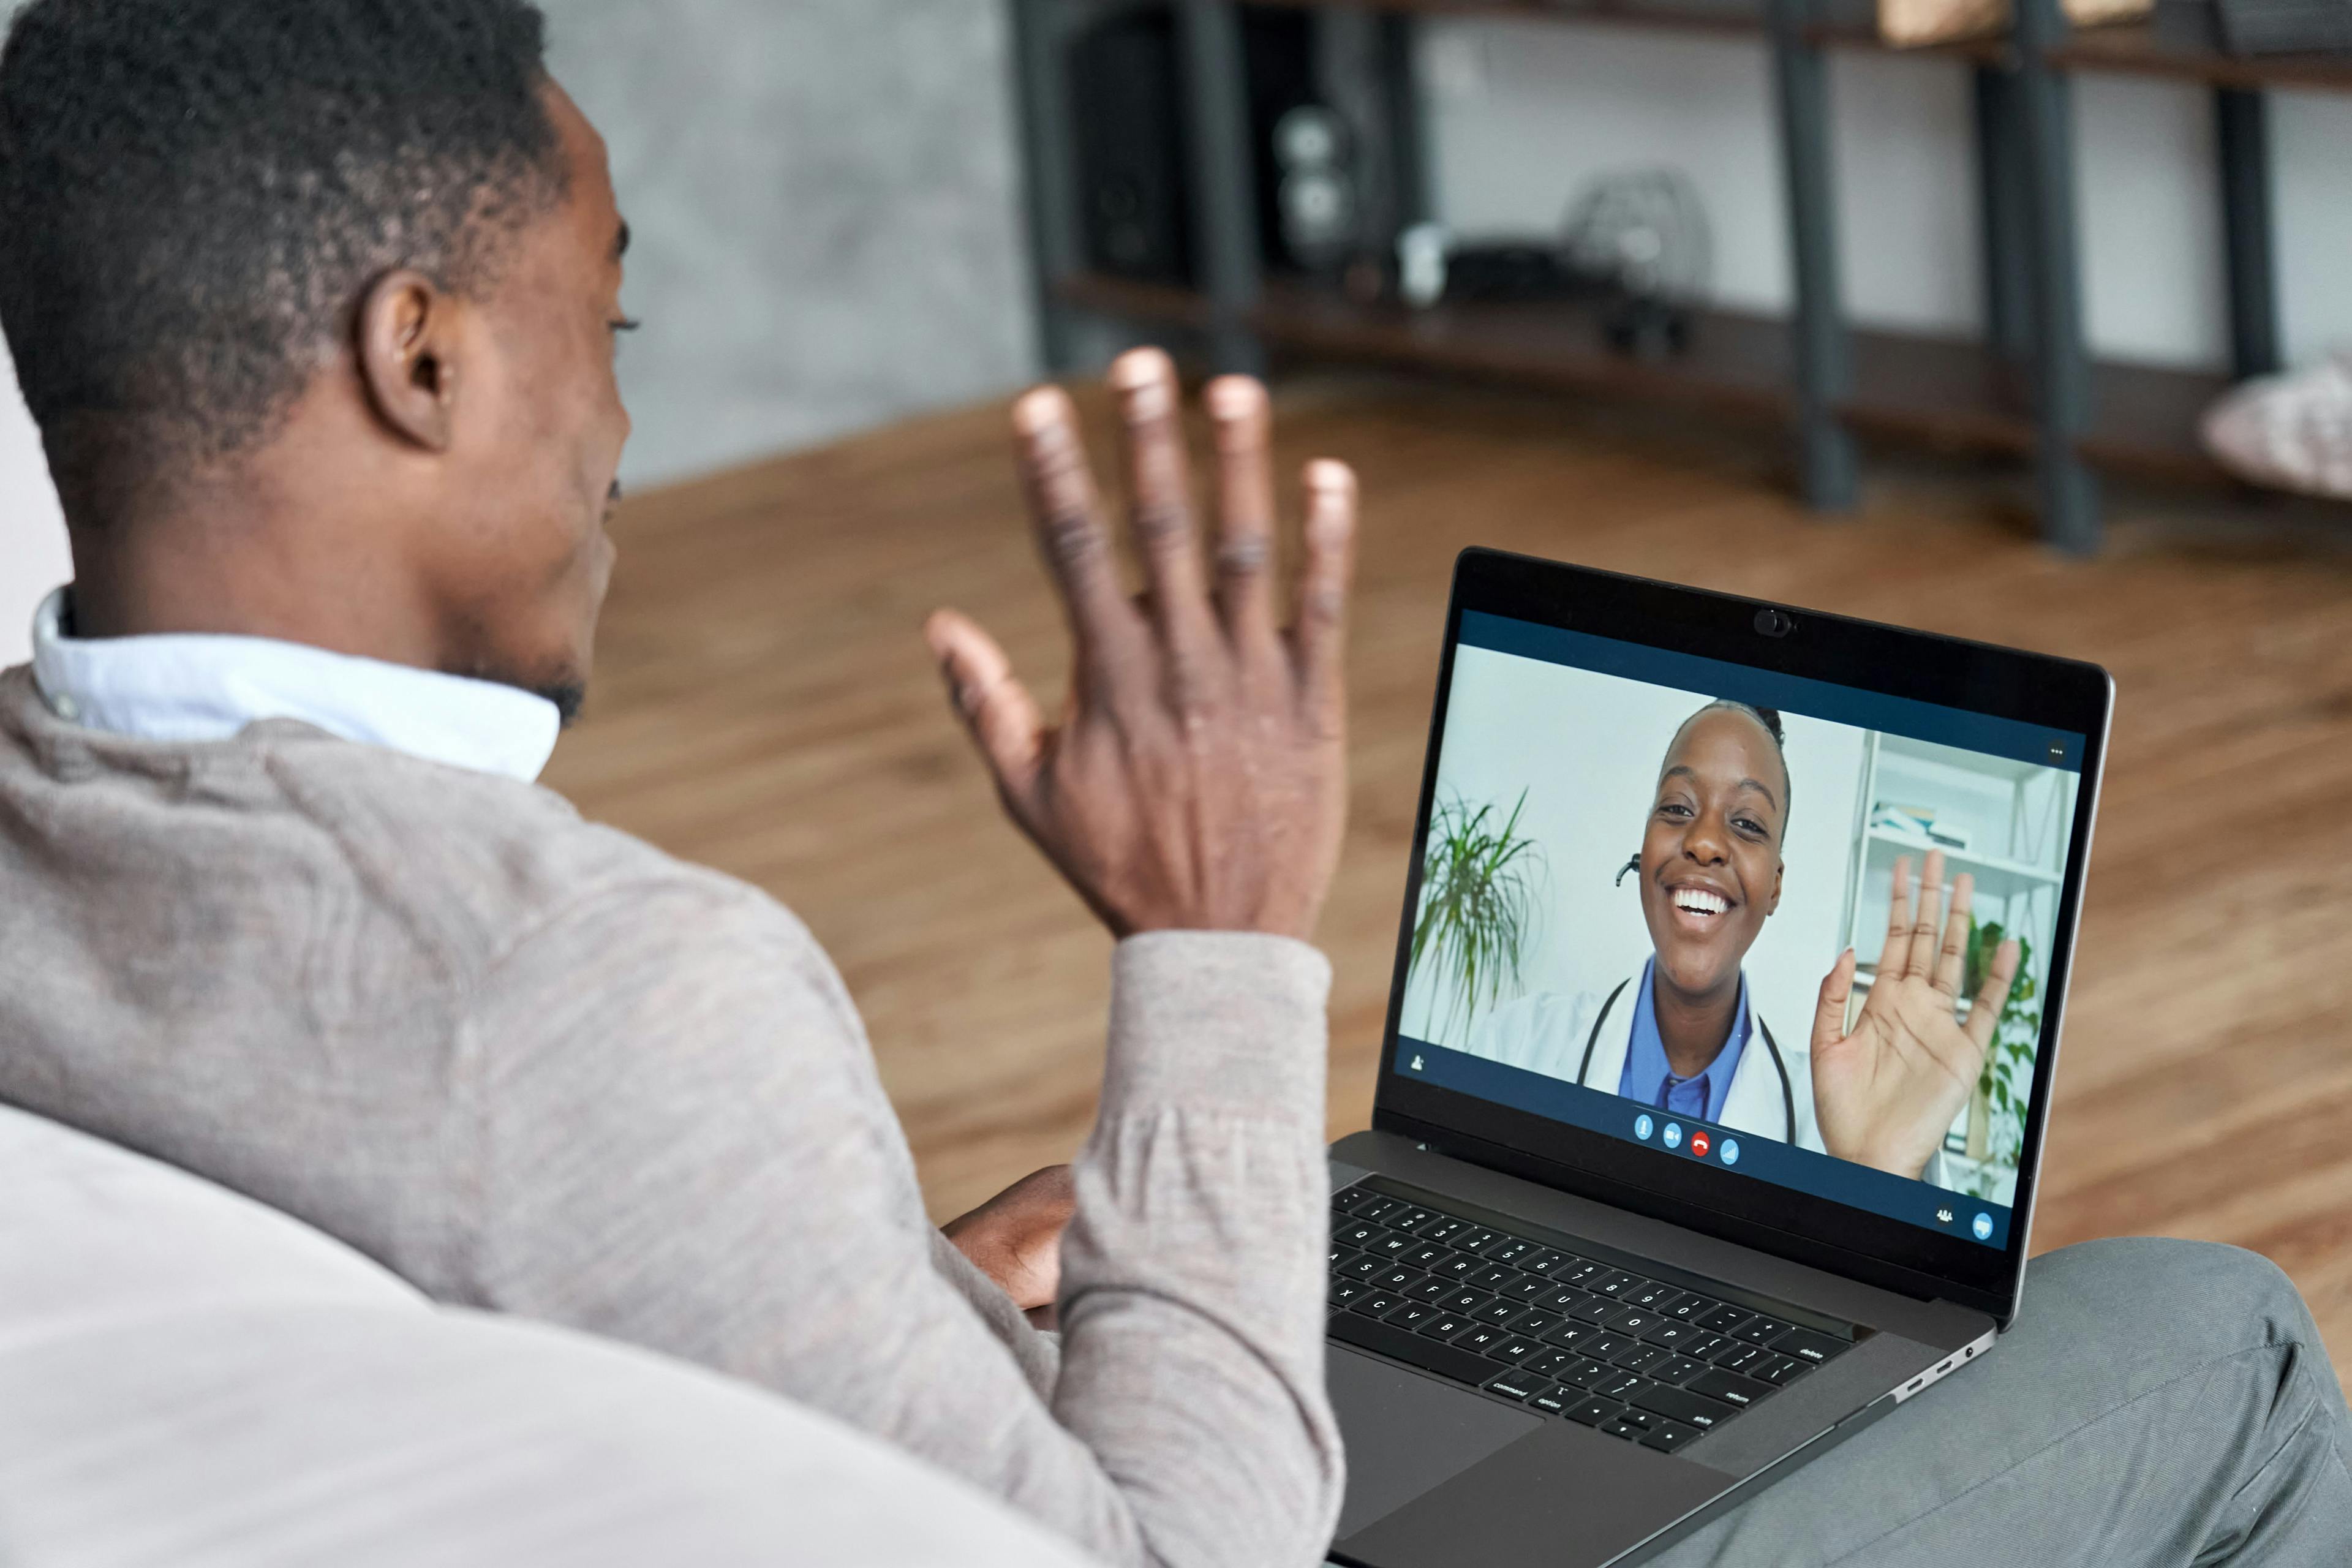 irtual therapist consulting young man during online appointment on laptop at home. | Image Credit: insta_photos - stock.adobe.com